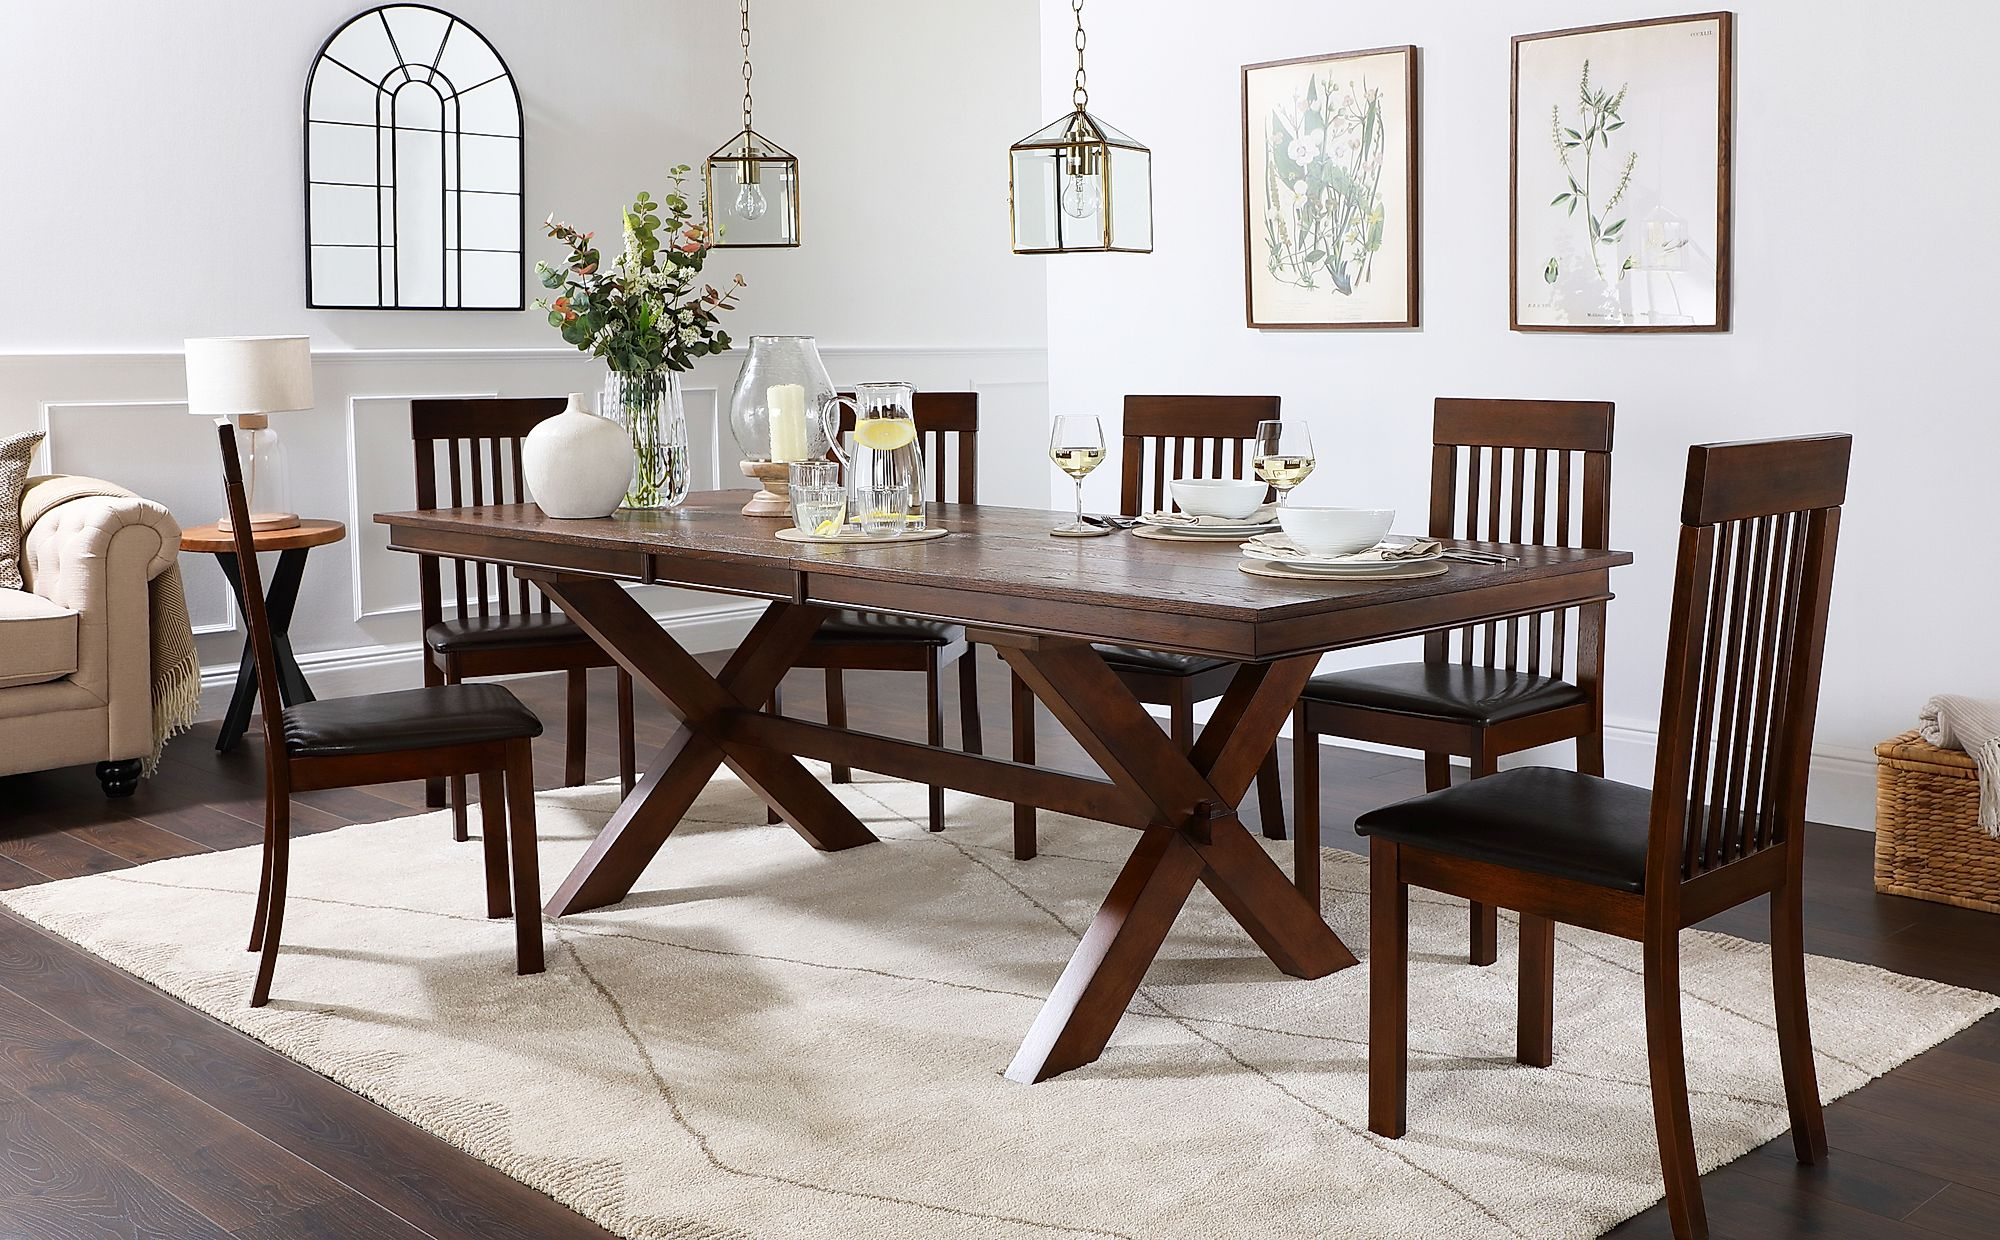 Grange Dark Wood Extending Dining Table With 6 Oxford Chairs Brown Leather Seat Pad in size 2000 X 1240